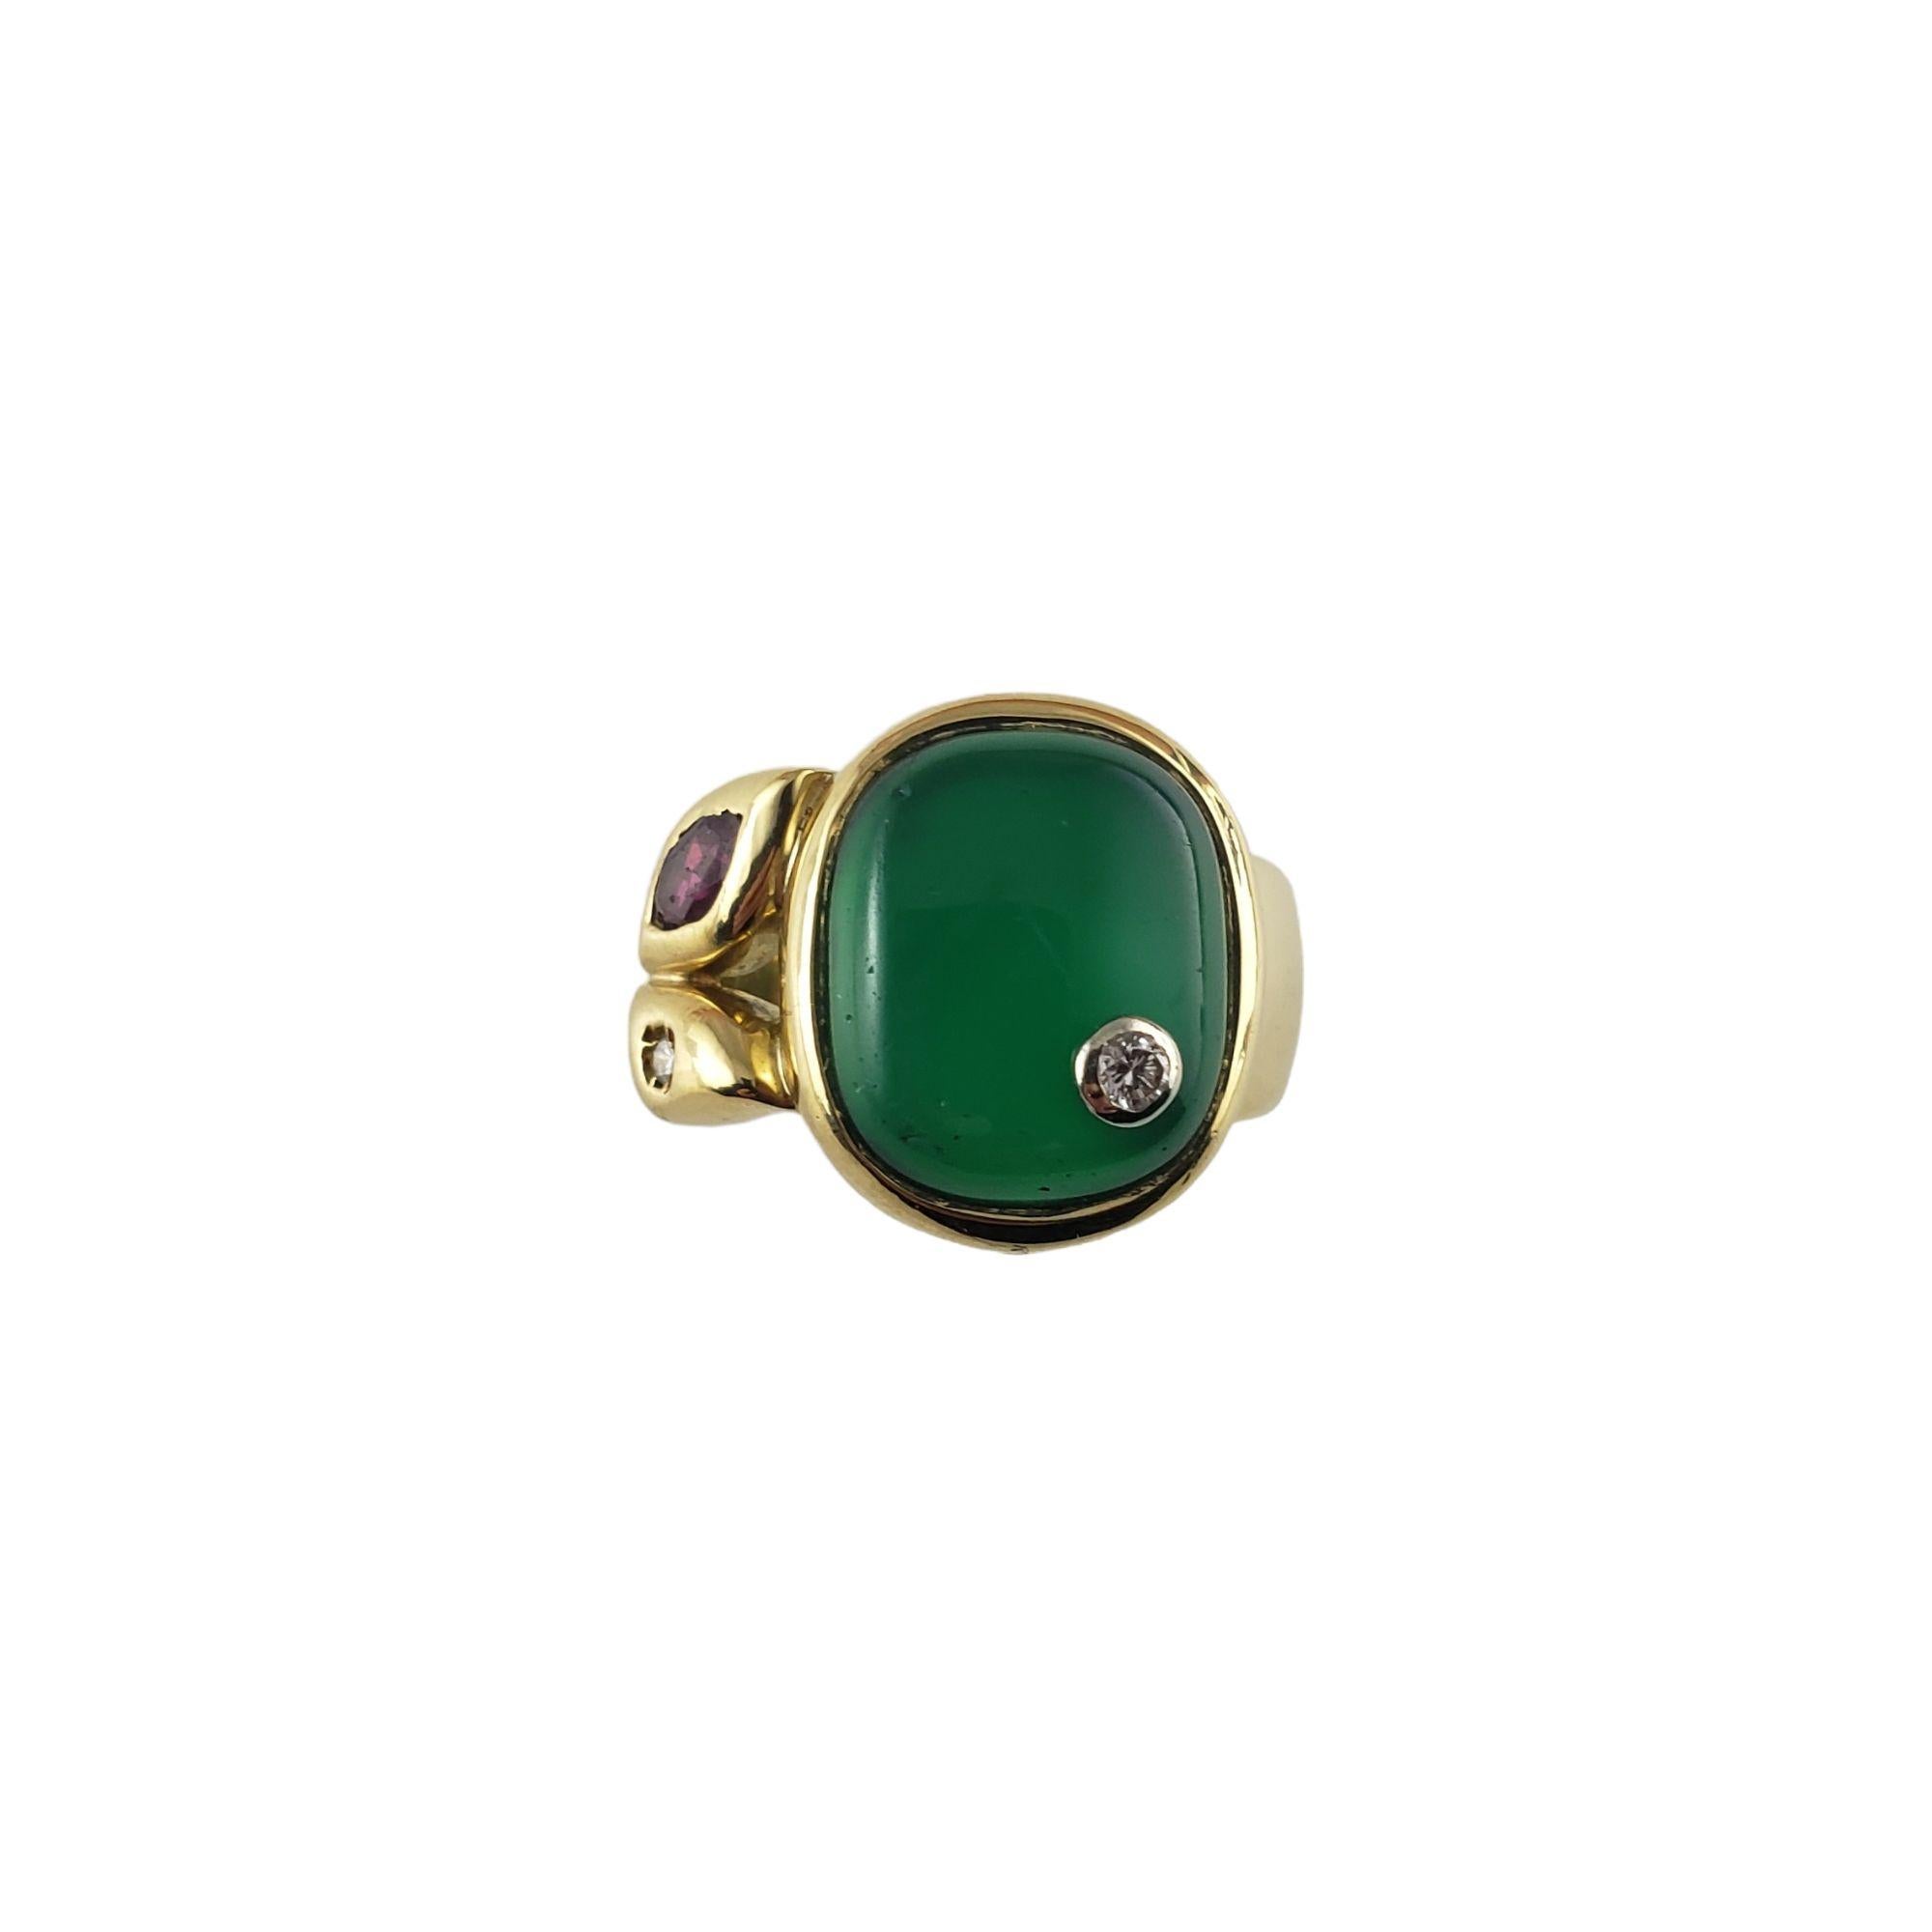 Vintage Manfredi 18 Karat Yellow Gold Green Chrysoprase and Diamond Ring Size 5-

This elegant ring features one green chrysoprase gemstone (13 mm x 11 mm), one marquis cut ruby and one round brilliant cut diamond set in classic 18K yellow gold.